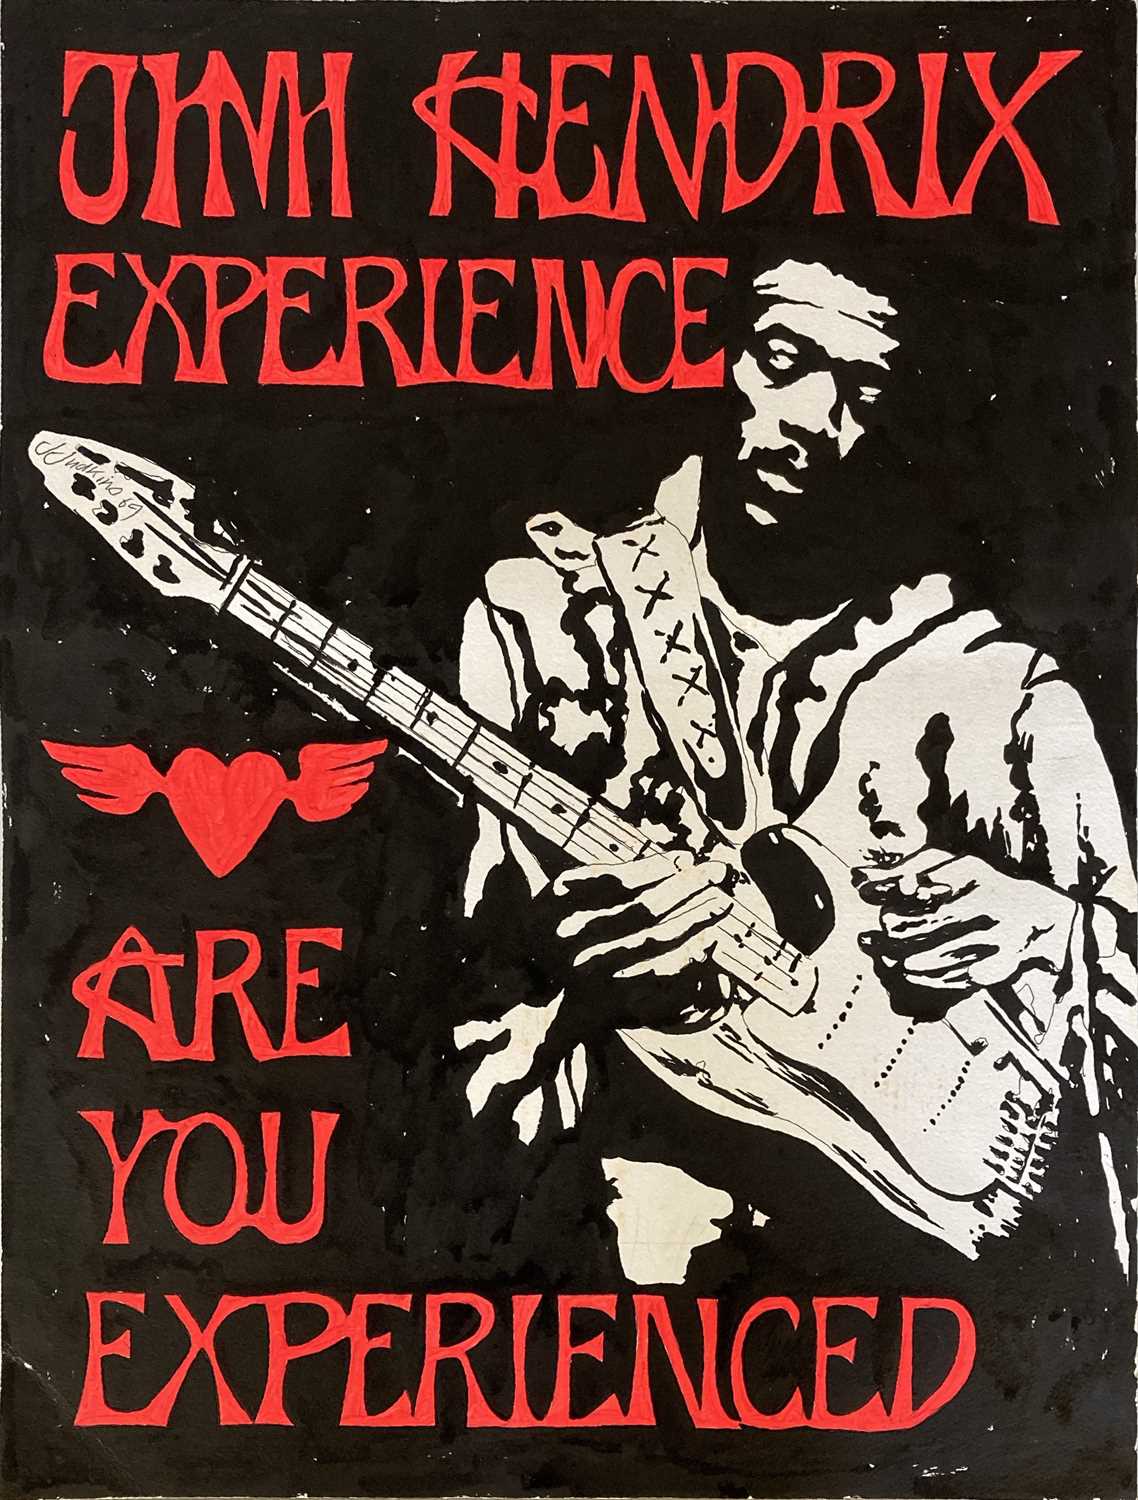 Lot 430 - JIMI HENDRIX  HAND PAINTED POSTER.